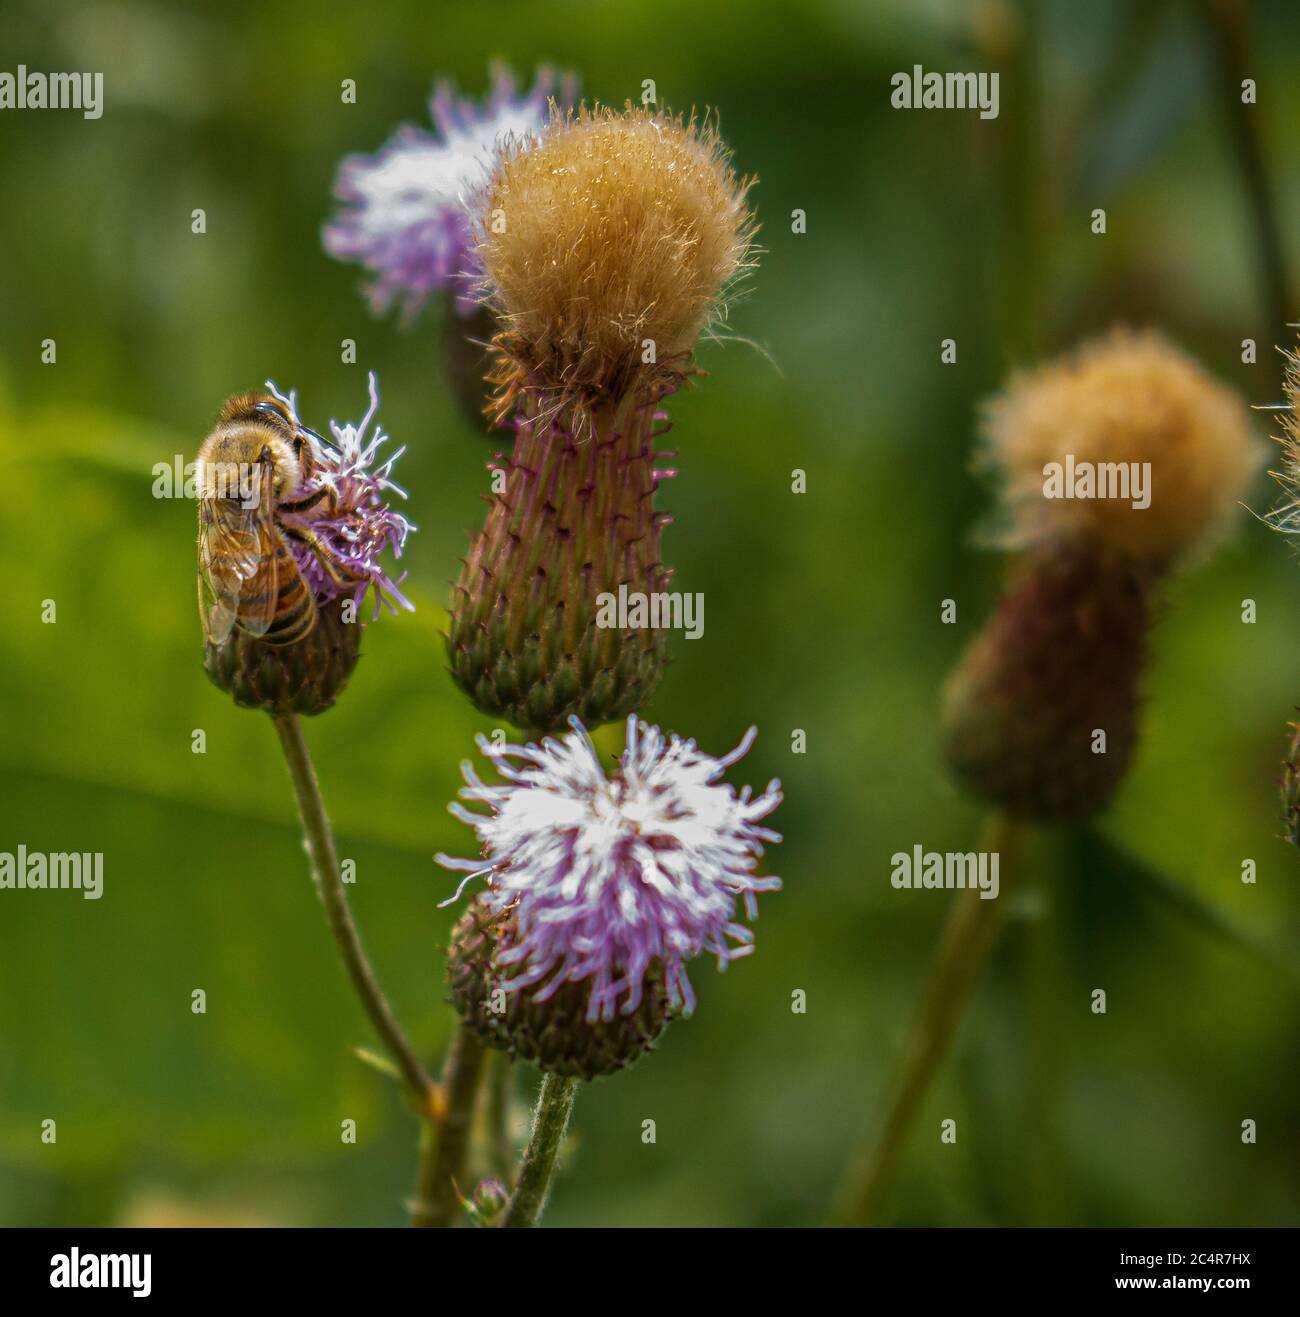 Spotted Knapweed, Centaurea stoebe, in bloom and gone to seed with a honey bee, Apis mellifera, pollinating the light purple flowers in a meadow. Stock Photo